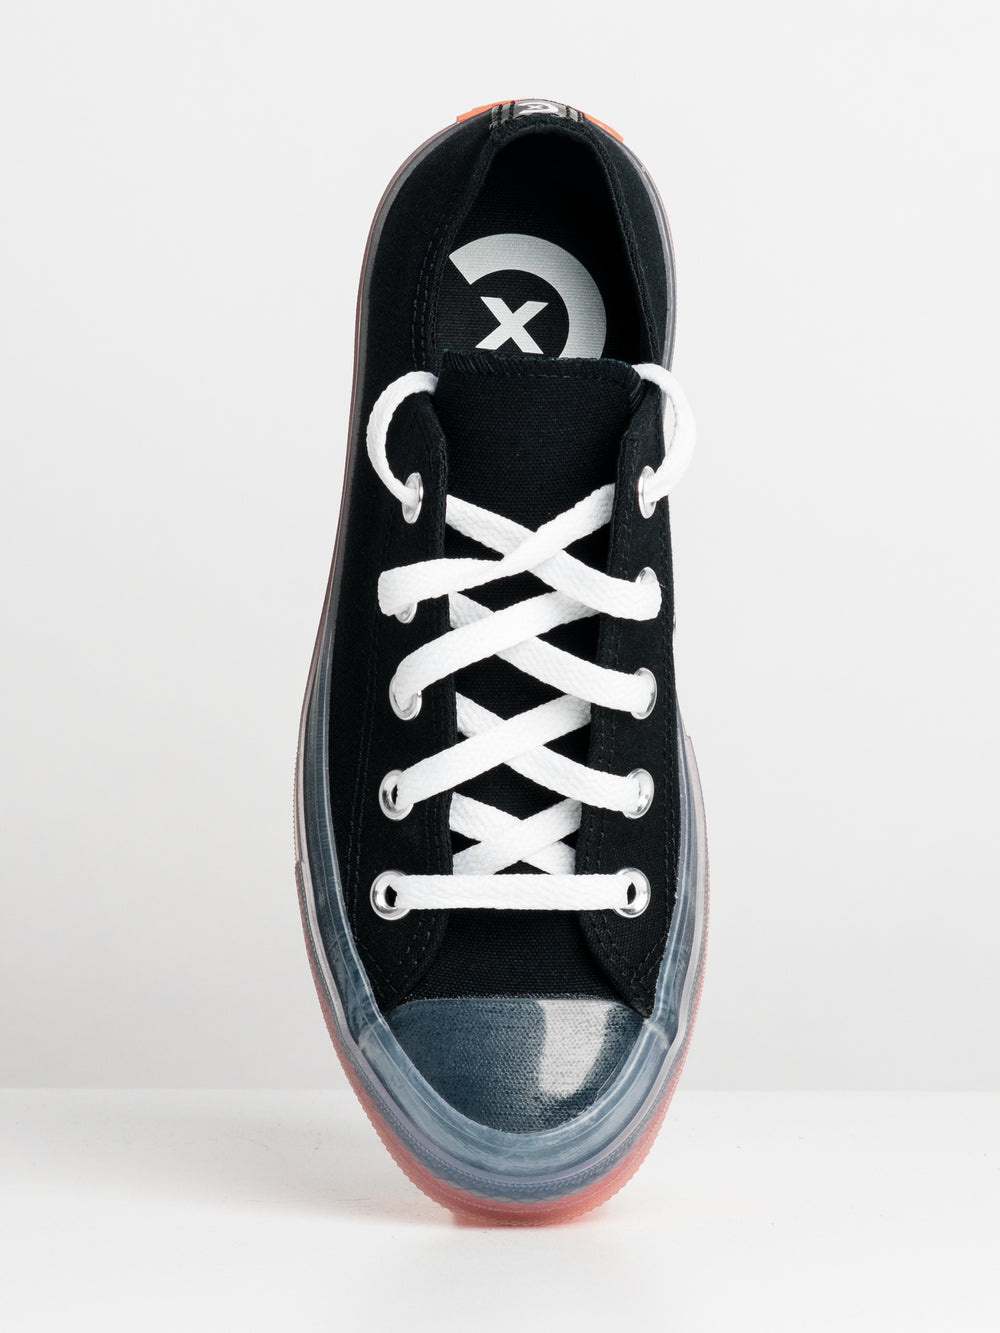 WOMENS CONVERSE CX OXFORD SNEAKER - CLEARANCE